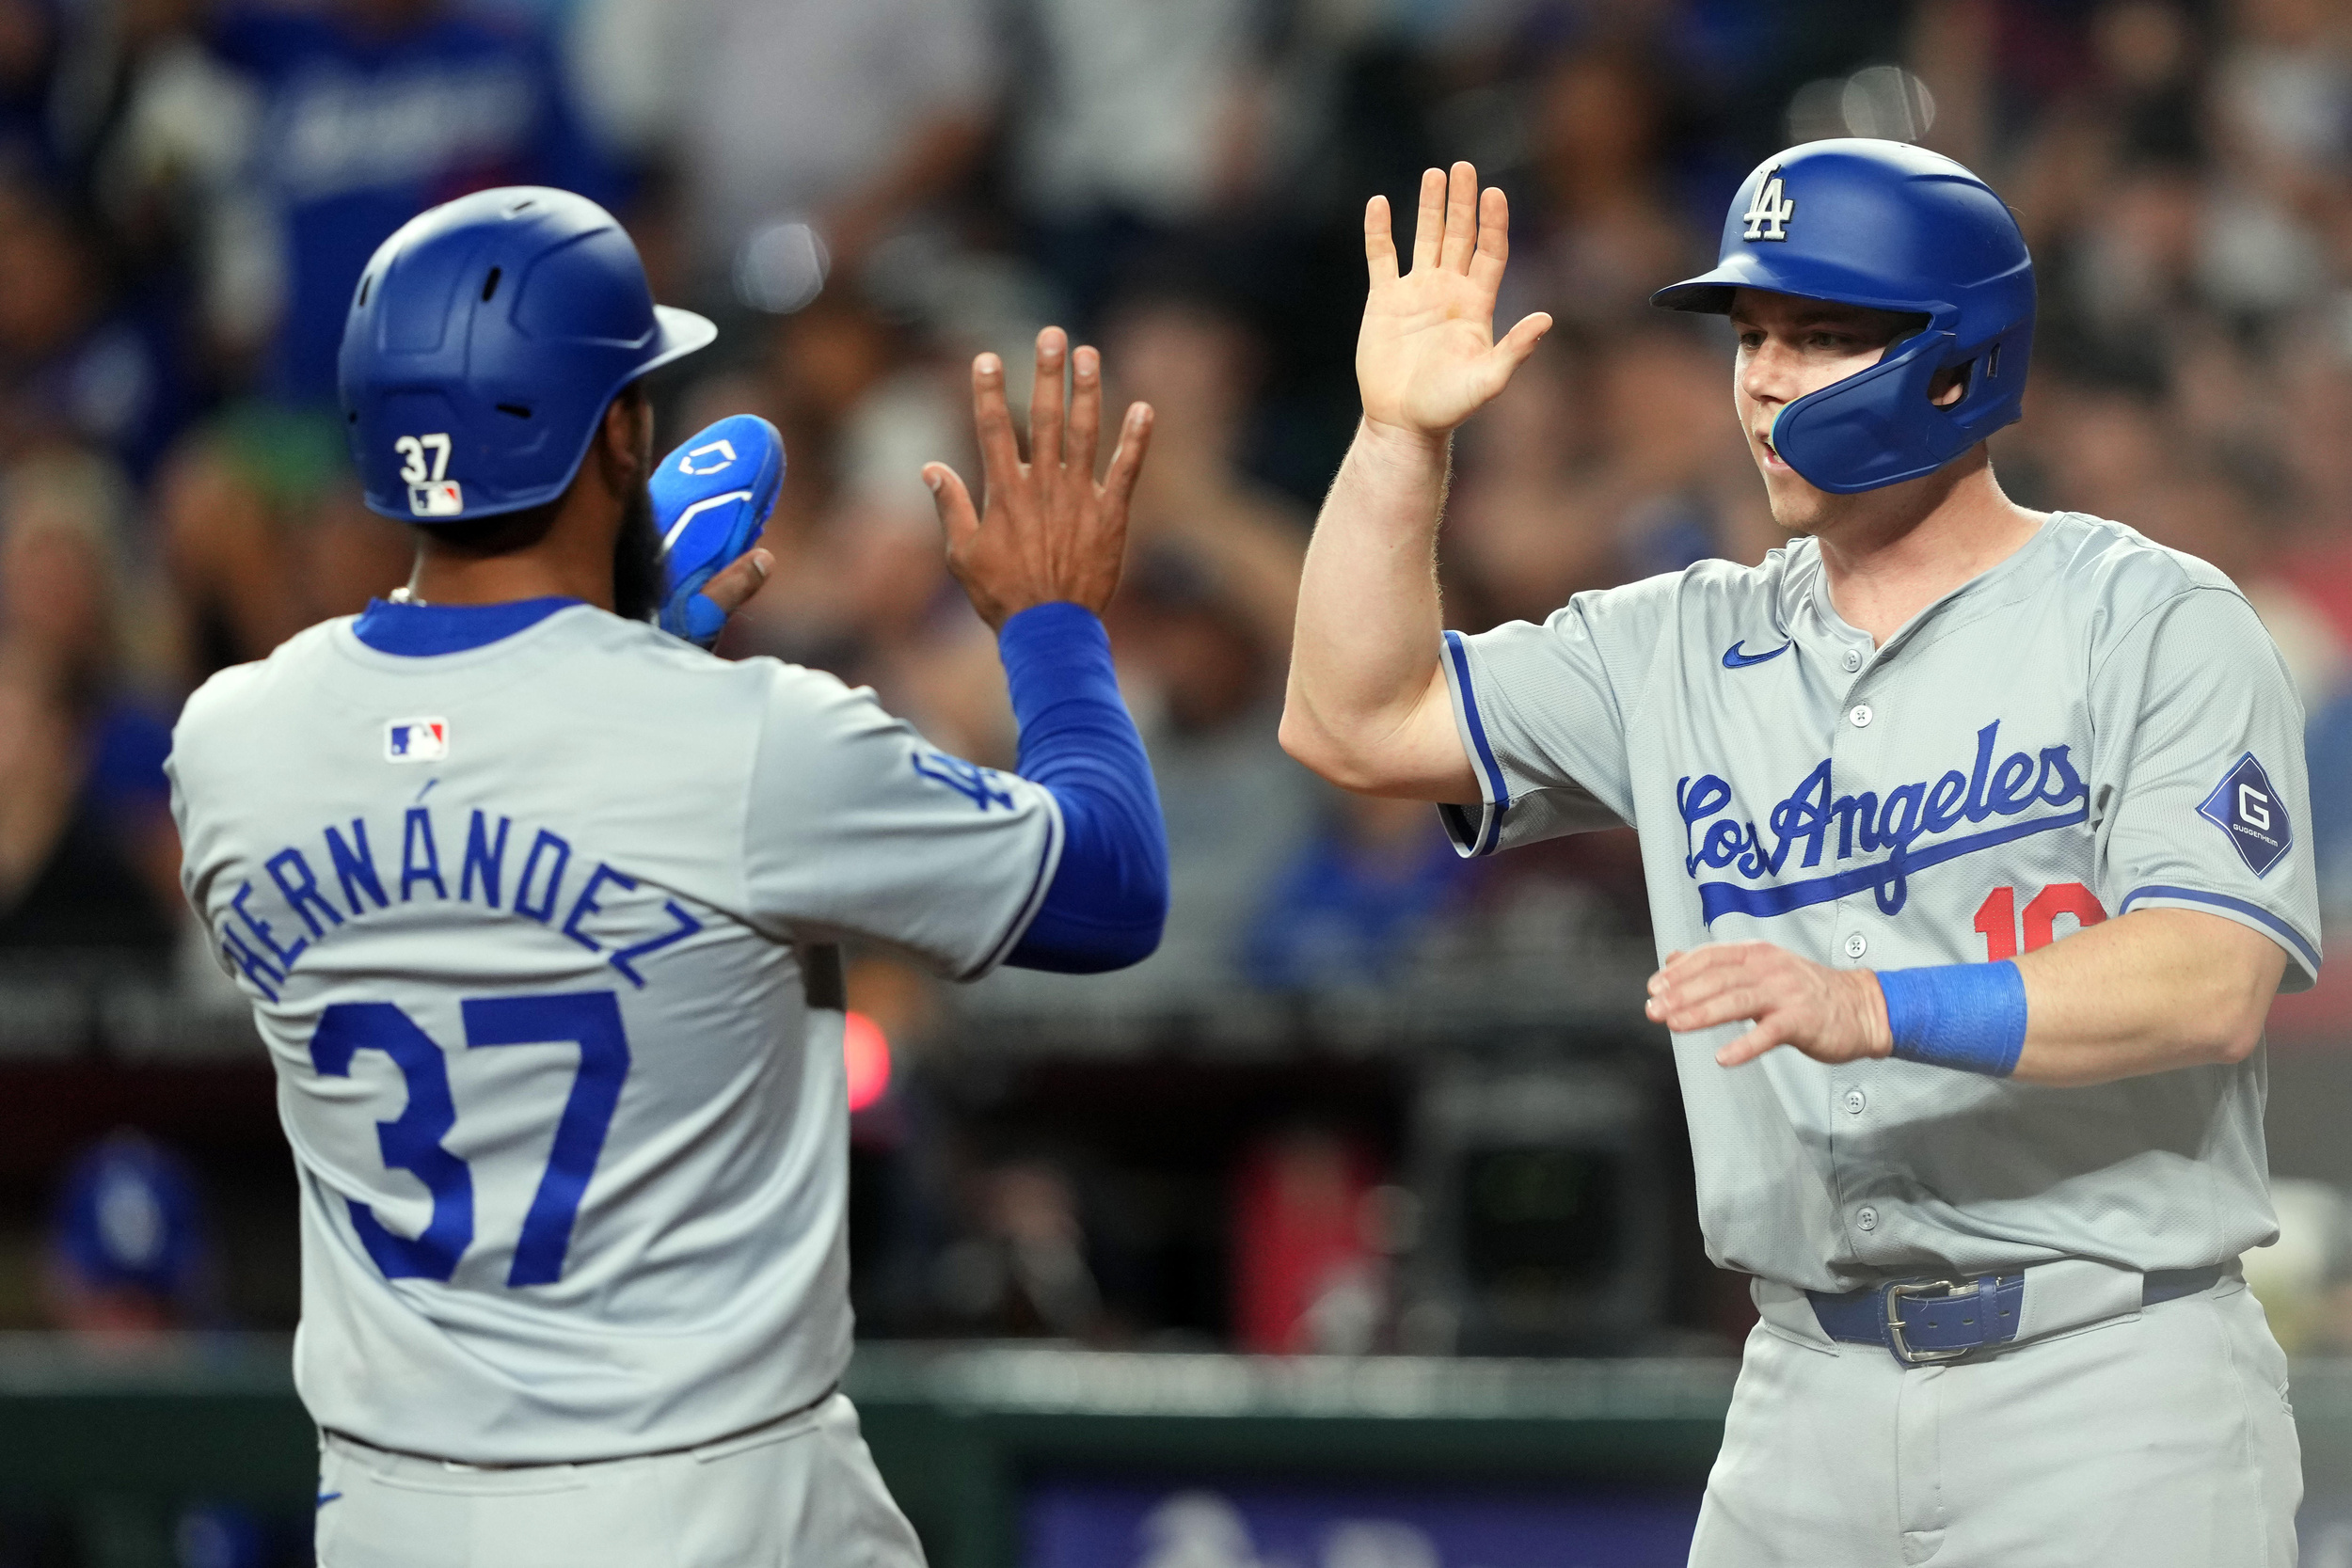 dodgers accomplish impressive feat for first time since 2006